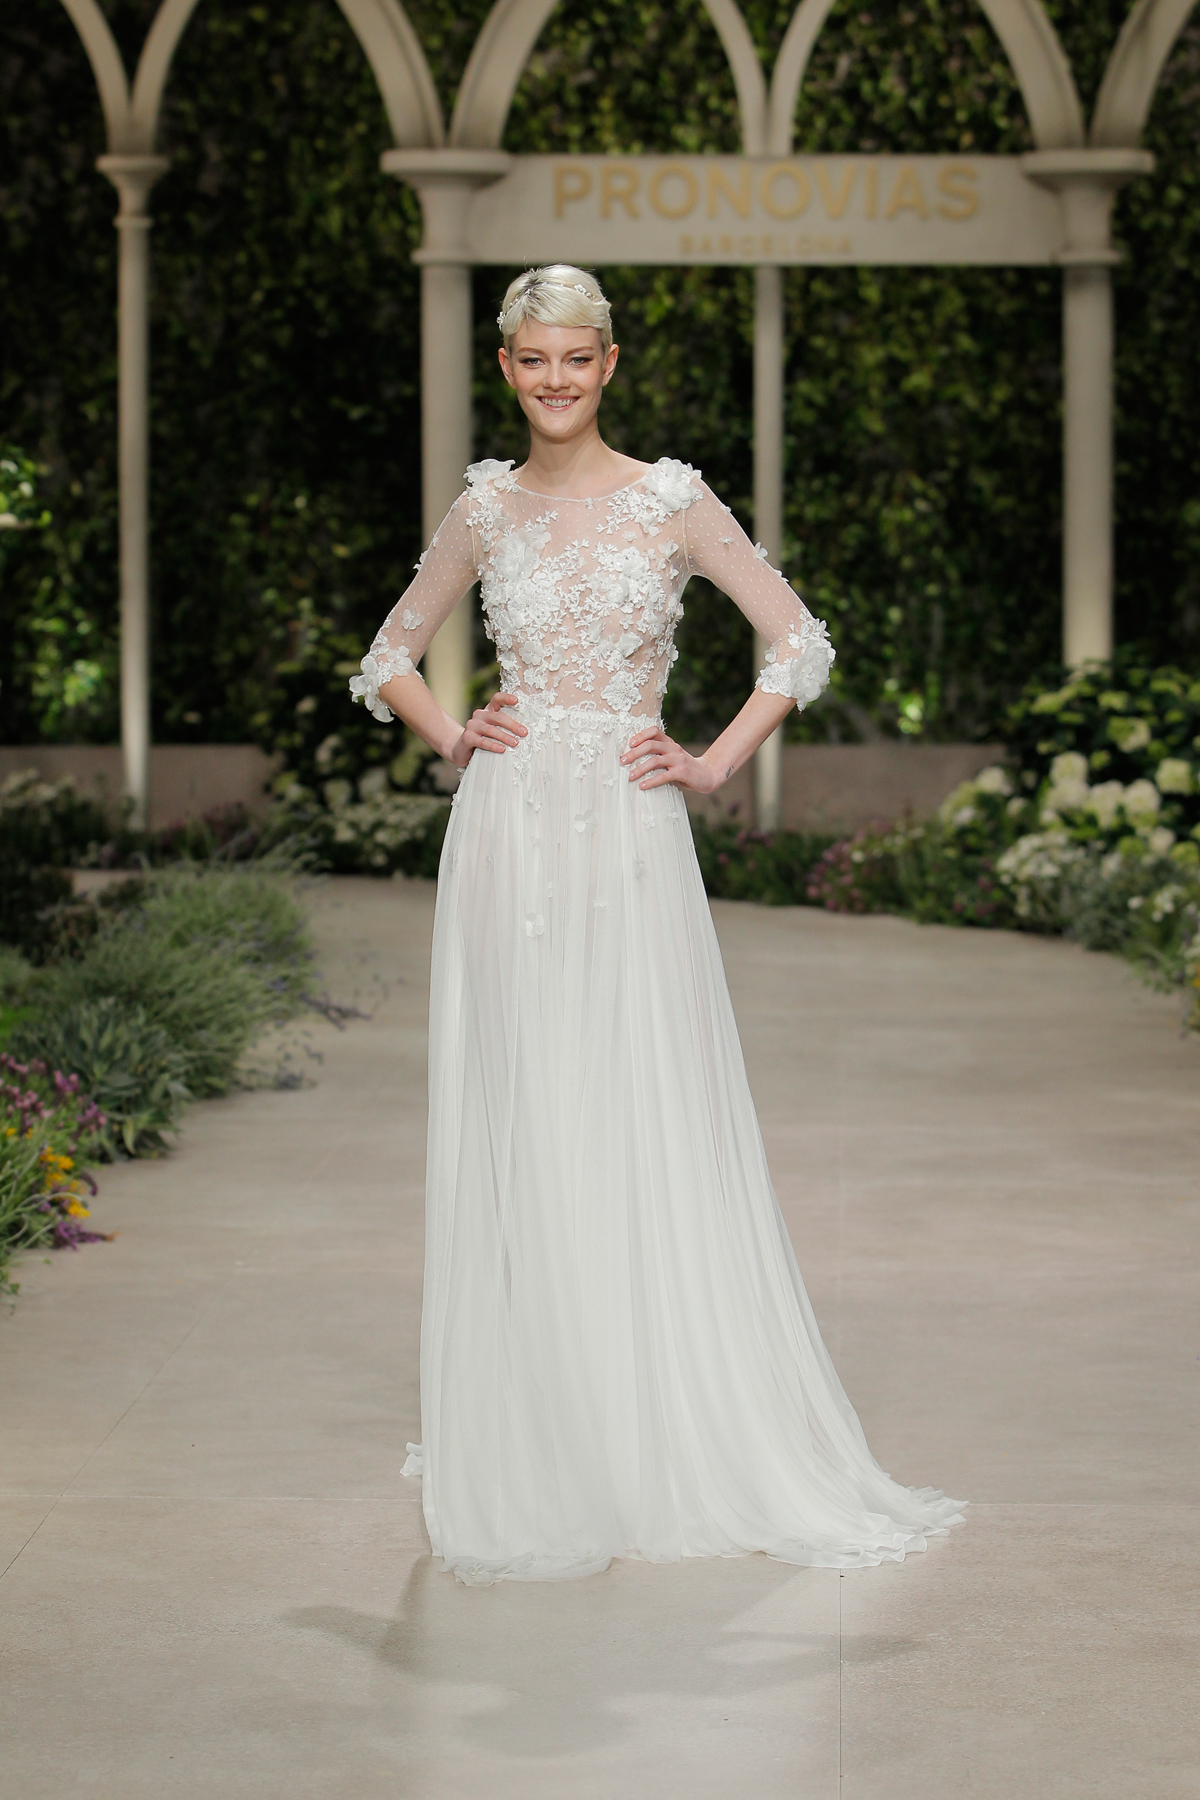 9 Pronovias In Bloom Official Show Shots 1